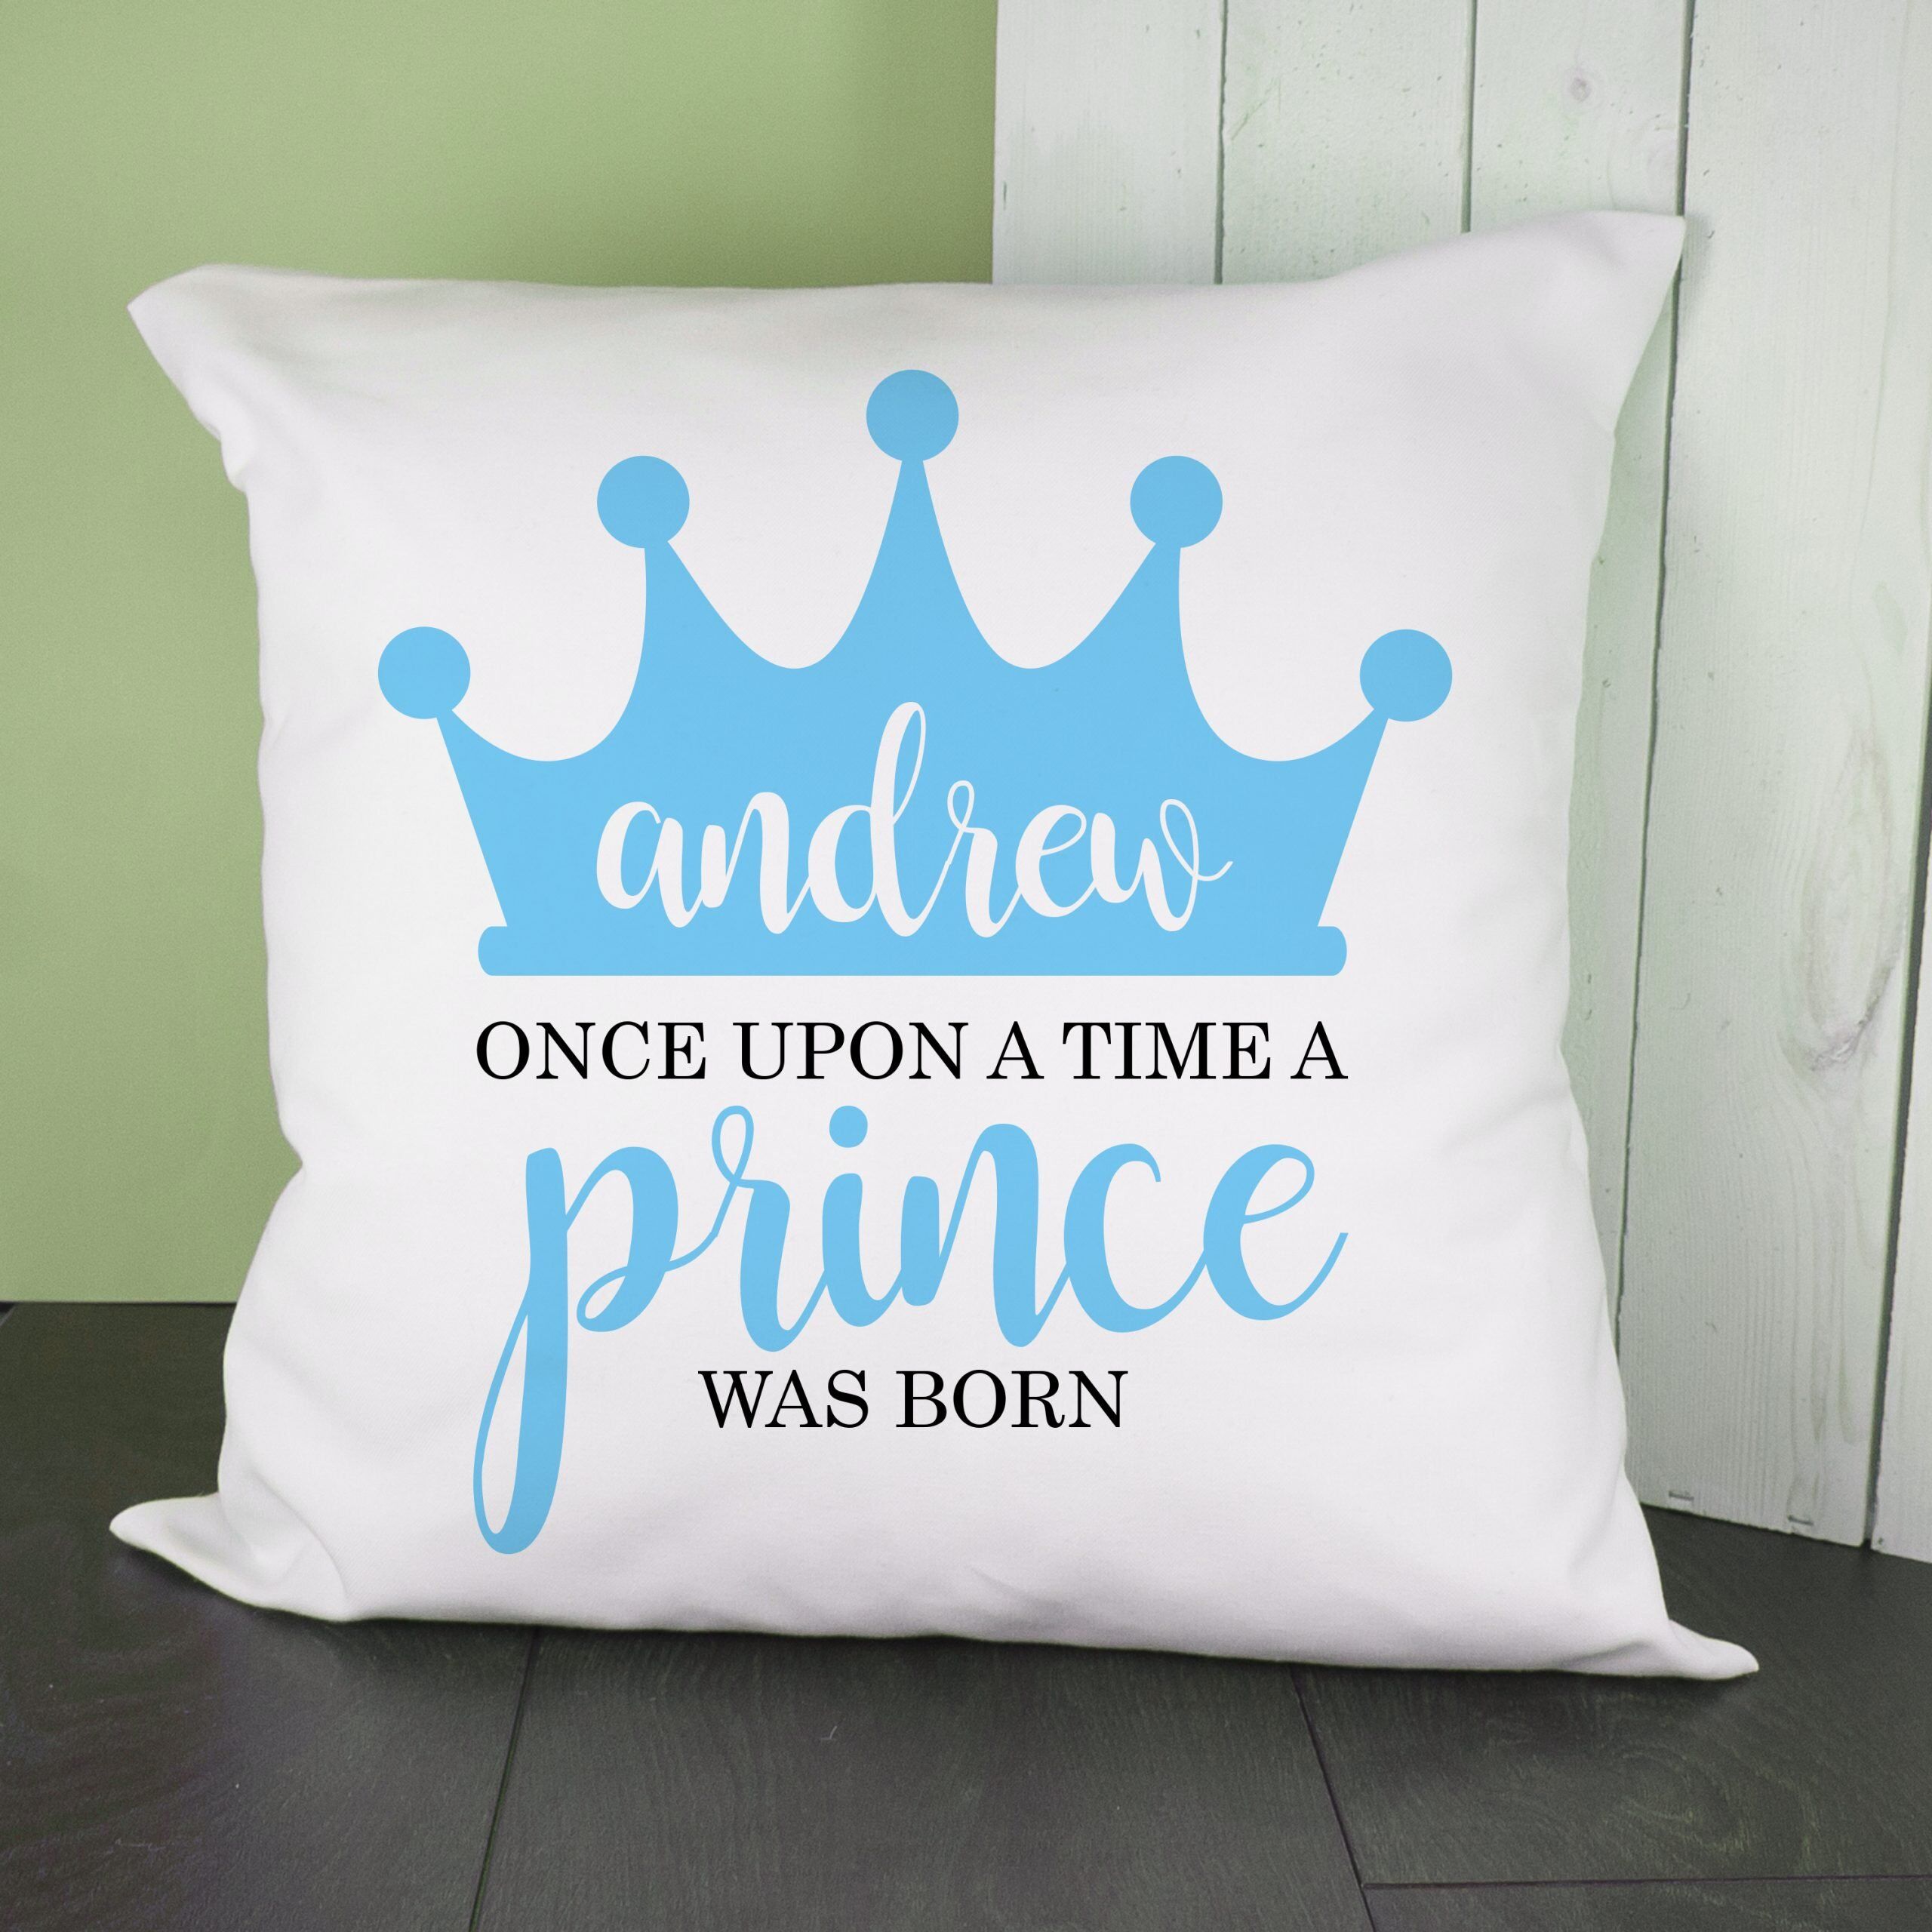 Personalised Cushion Cover – Prince